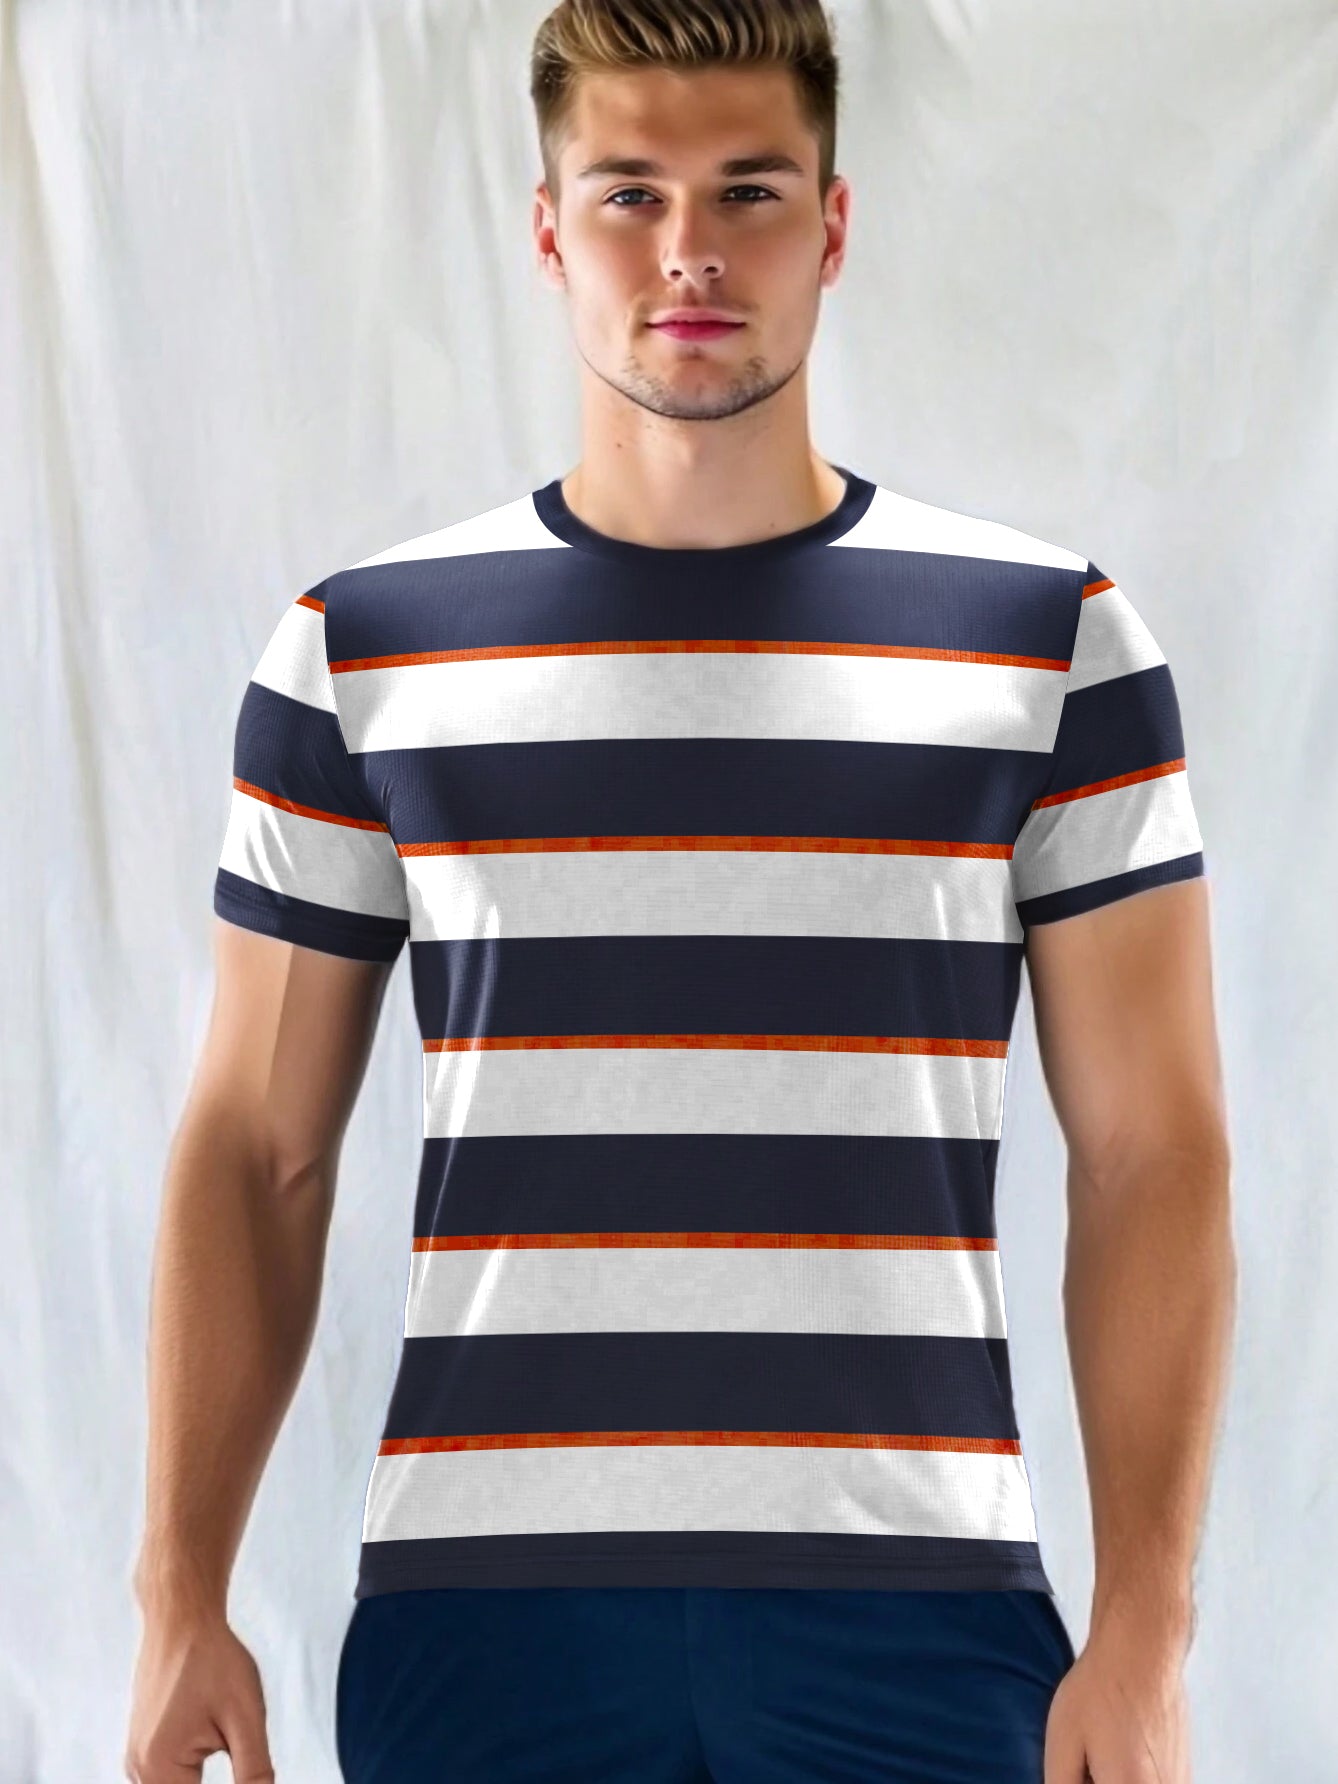 Nxt Single Jersey Crew Neck Tee Shirt For Men-White with Navy Stripe-BE959/BR13207